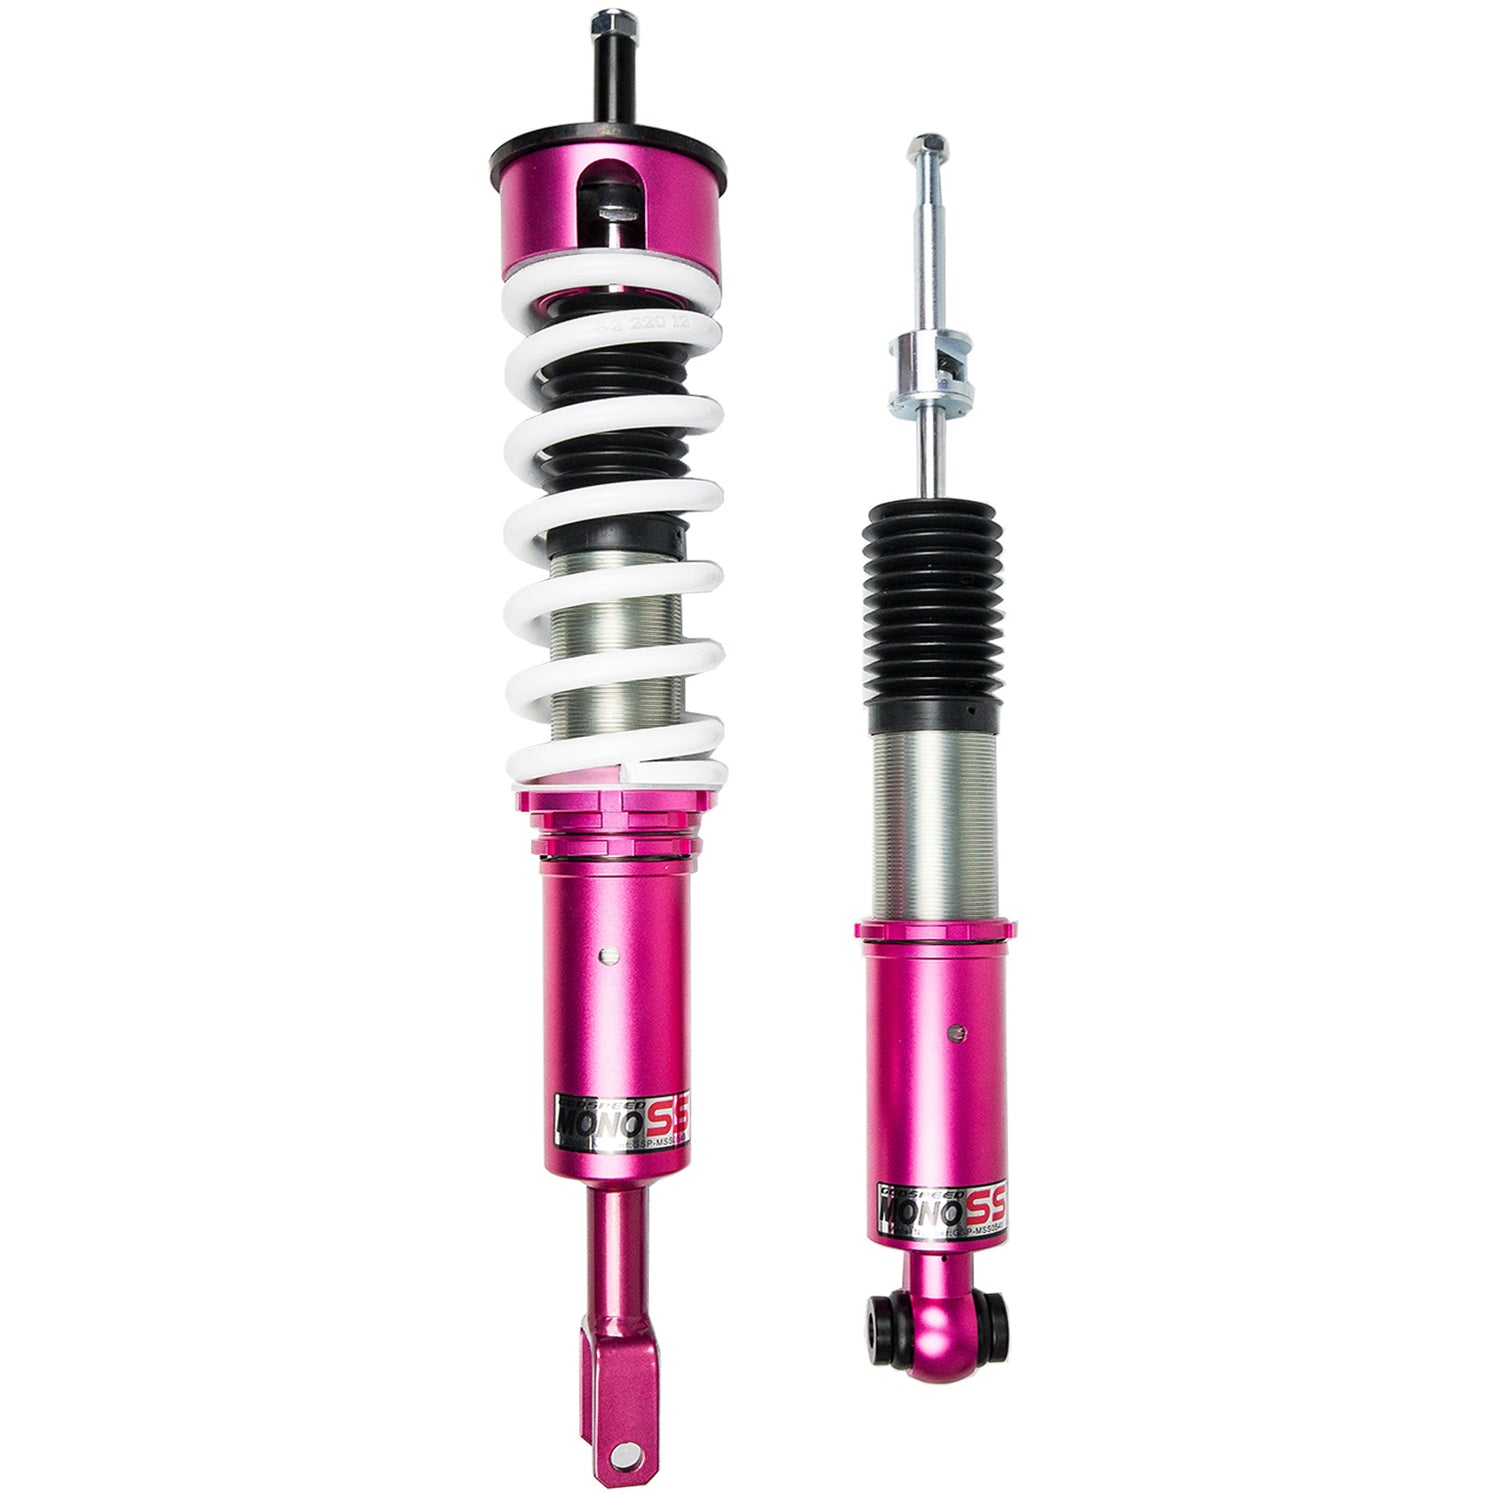 Godspeed MSS0540-A MonoSS Coilover Lowering Kit, Fully Adjustable, Ride Height, Spring Tension And 16 Click Damping, Audi A4(B6/B7) 2002-08(FWD/Quattro)